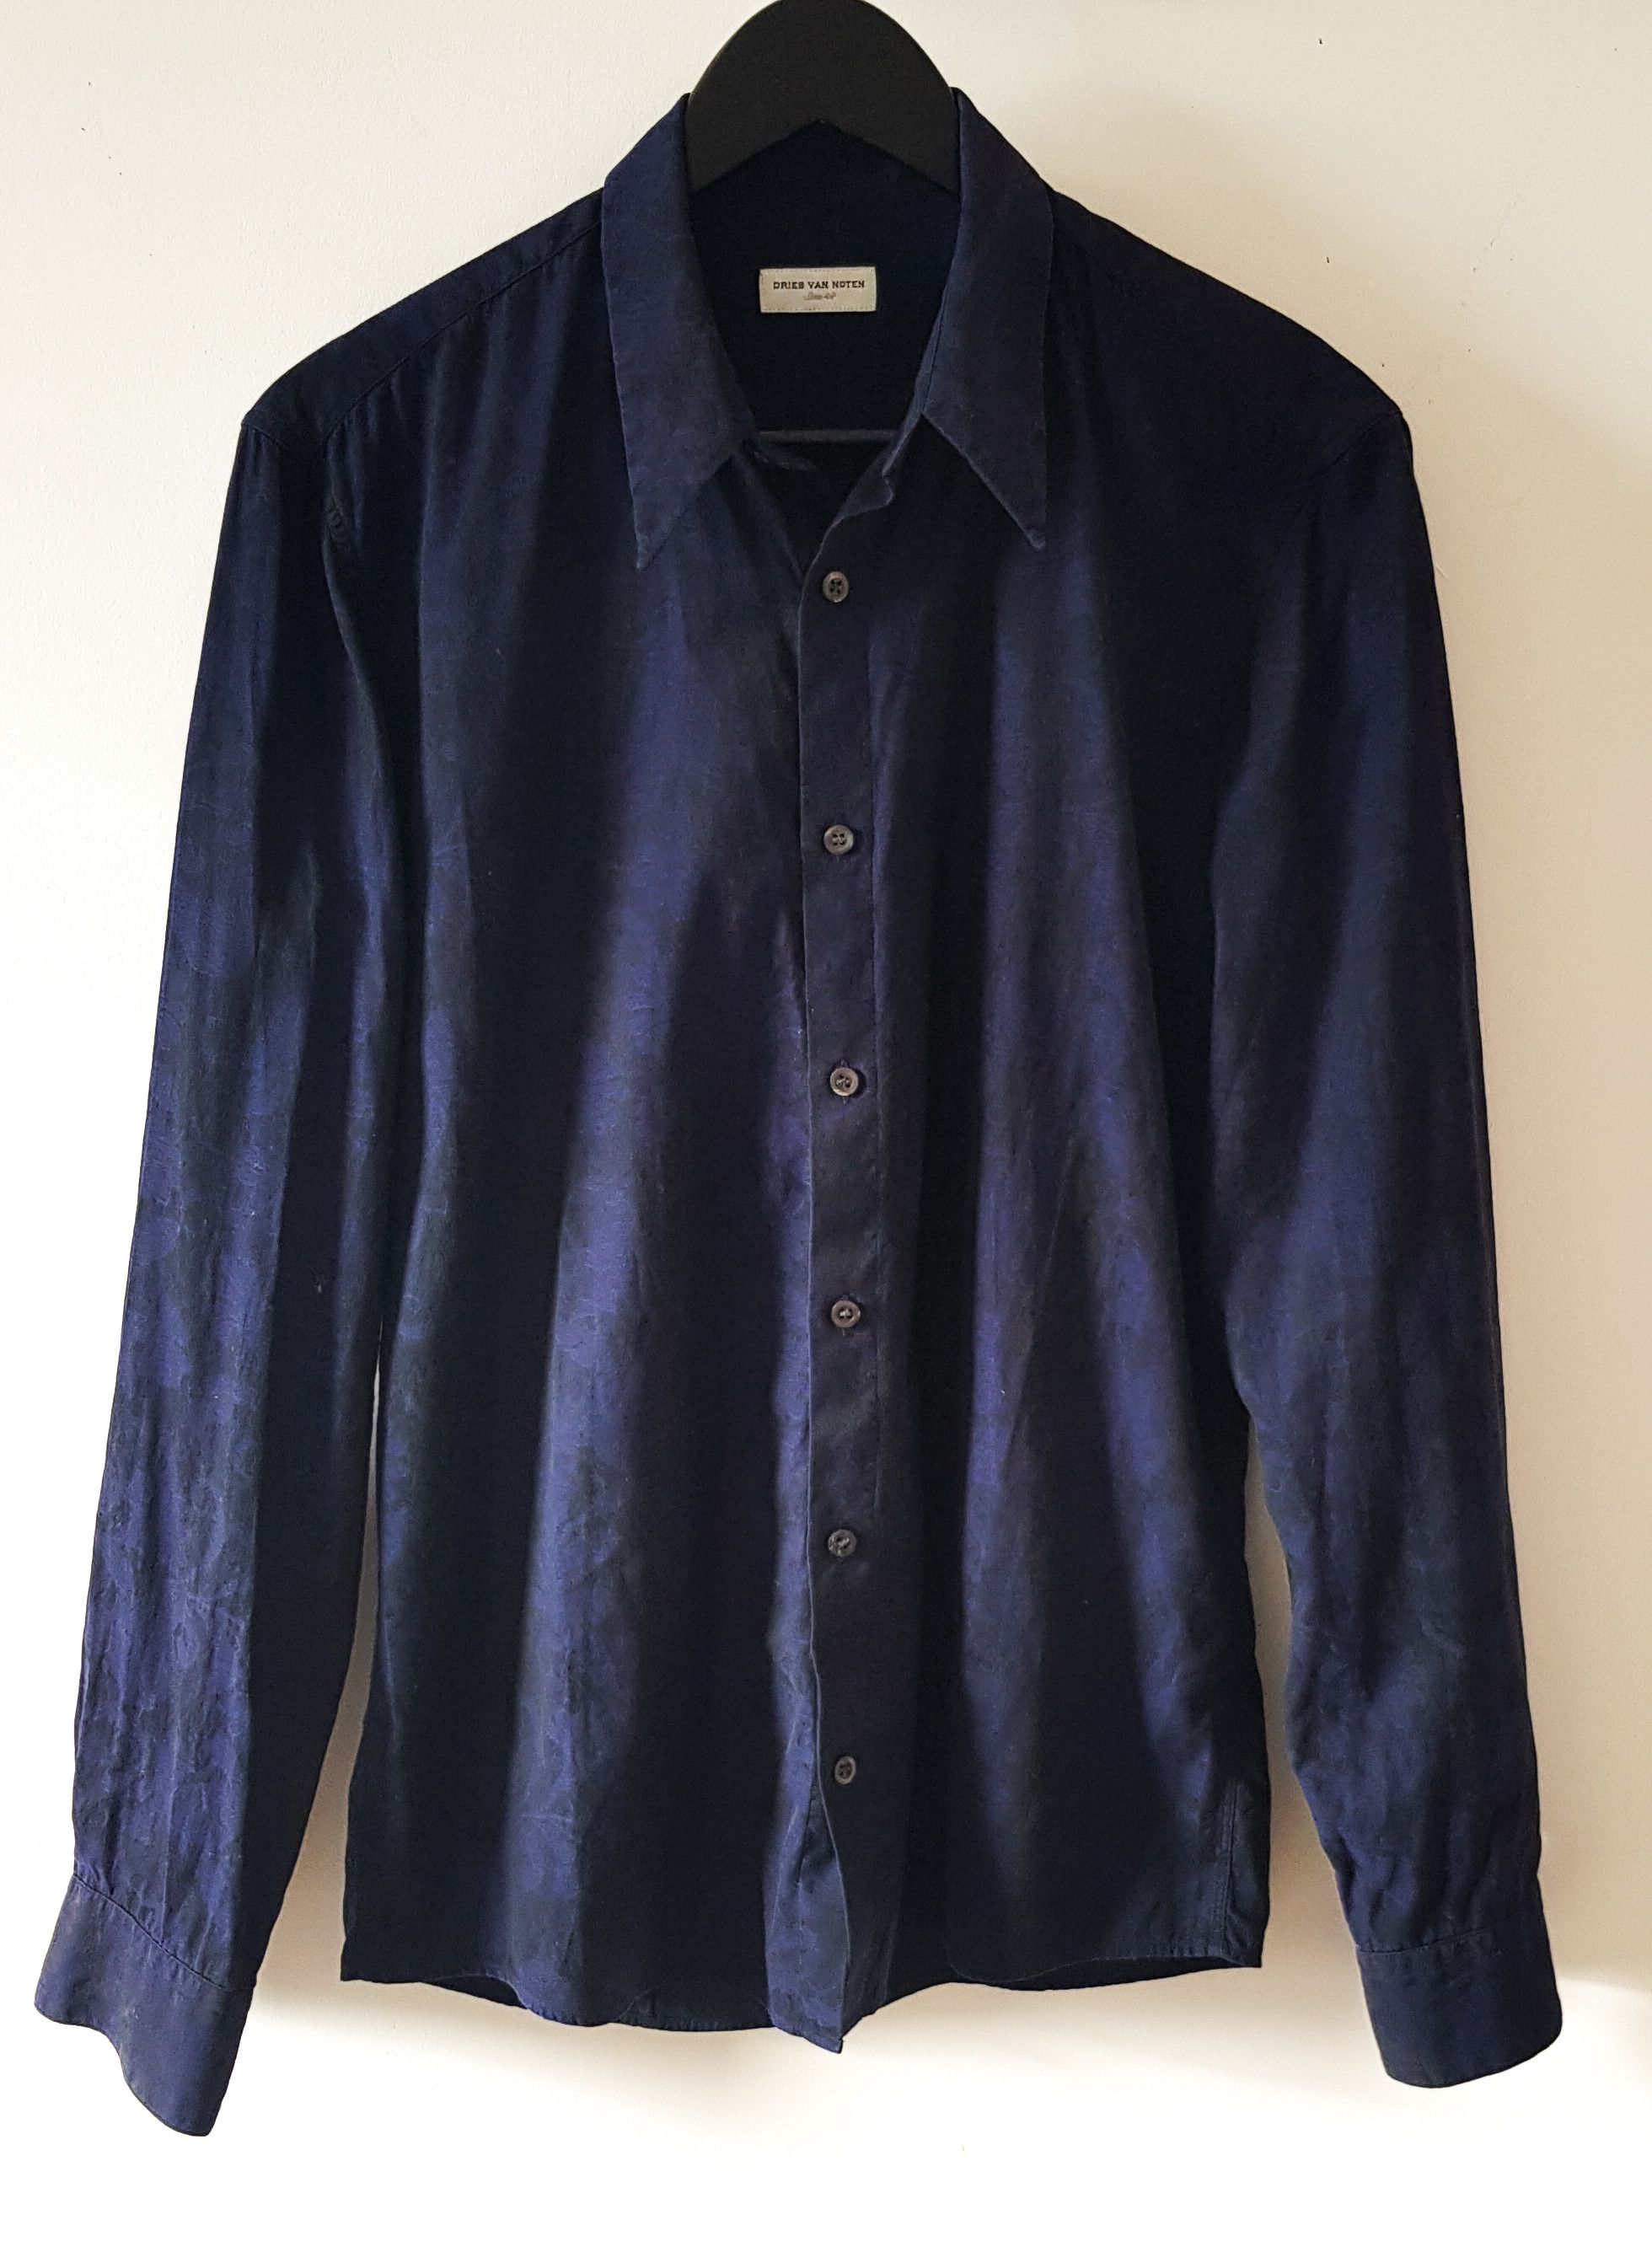 Dries Van Noten Black shirt with fine blue embroidery. | Grailed